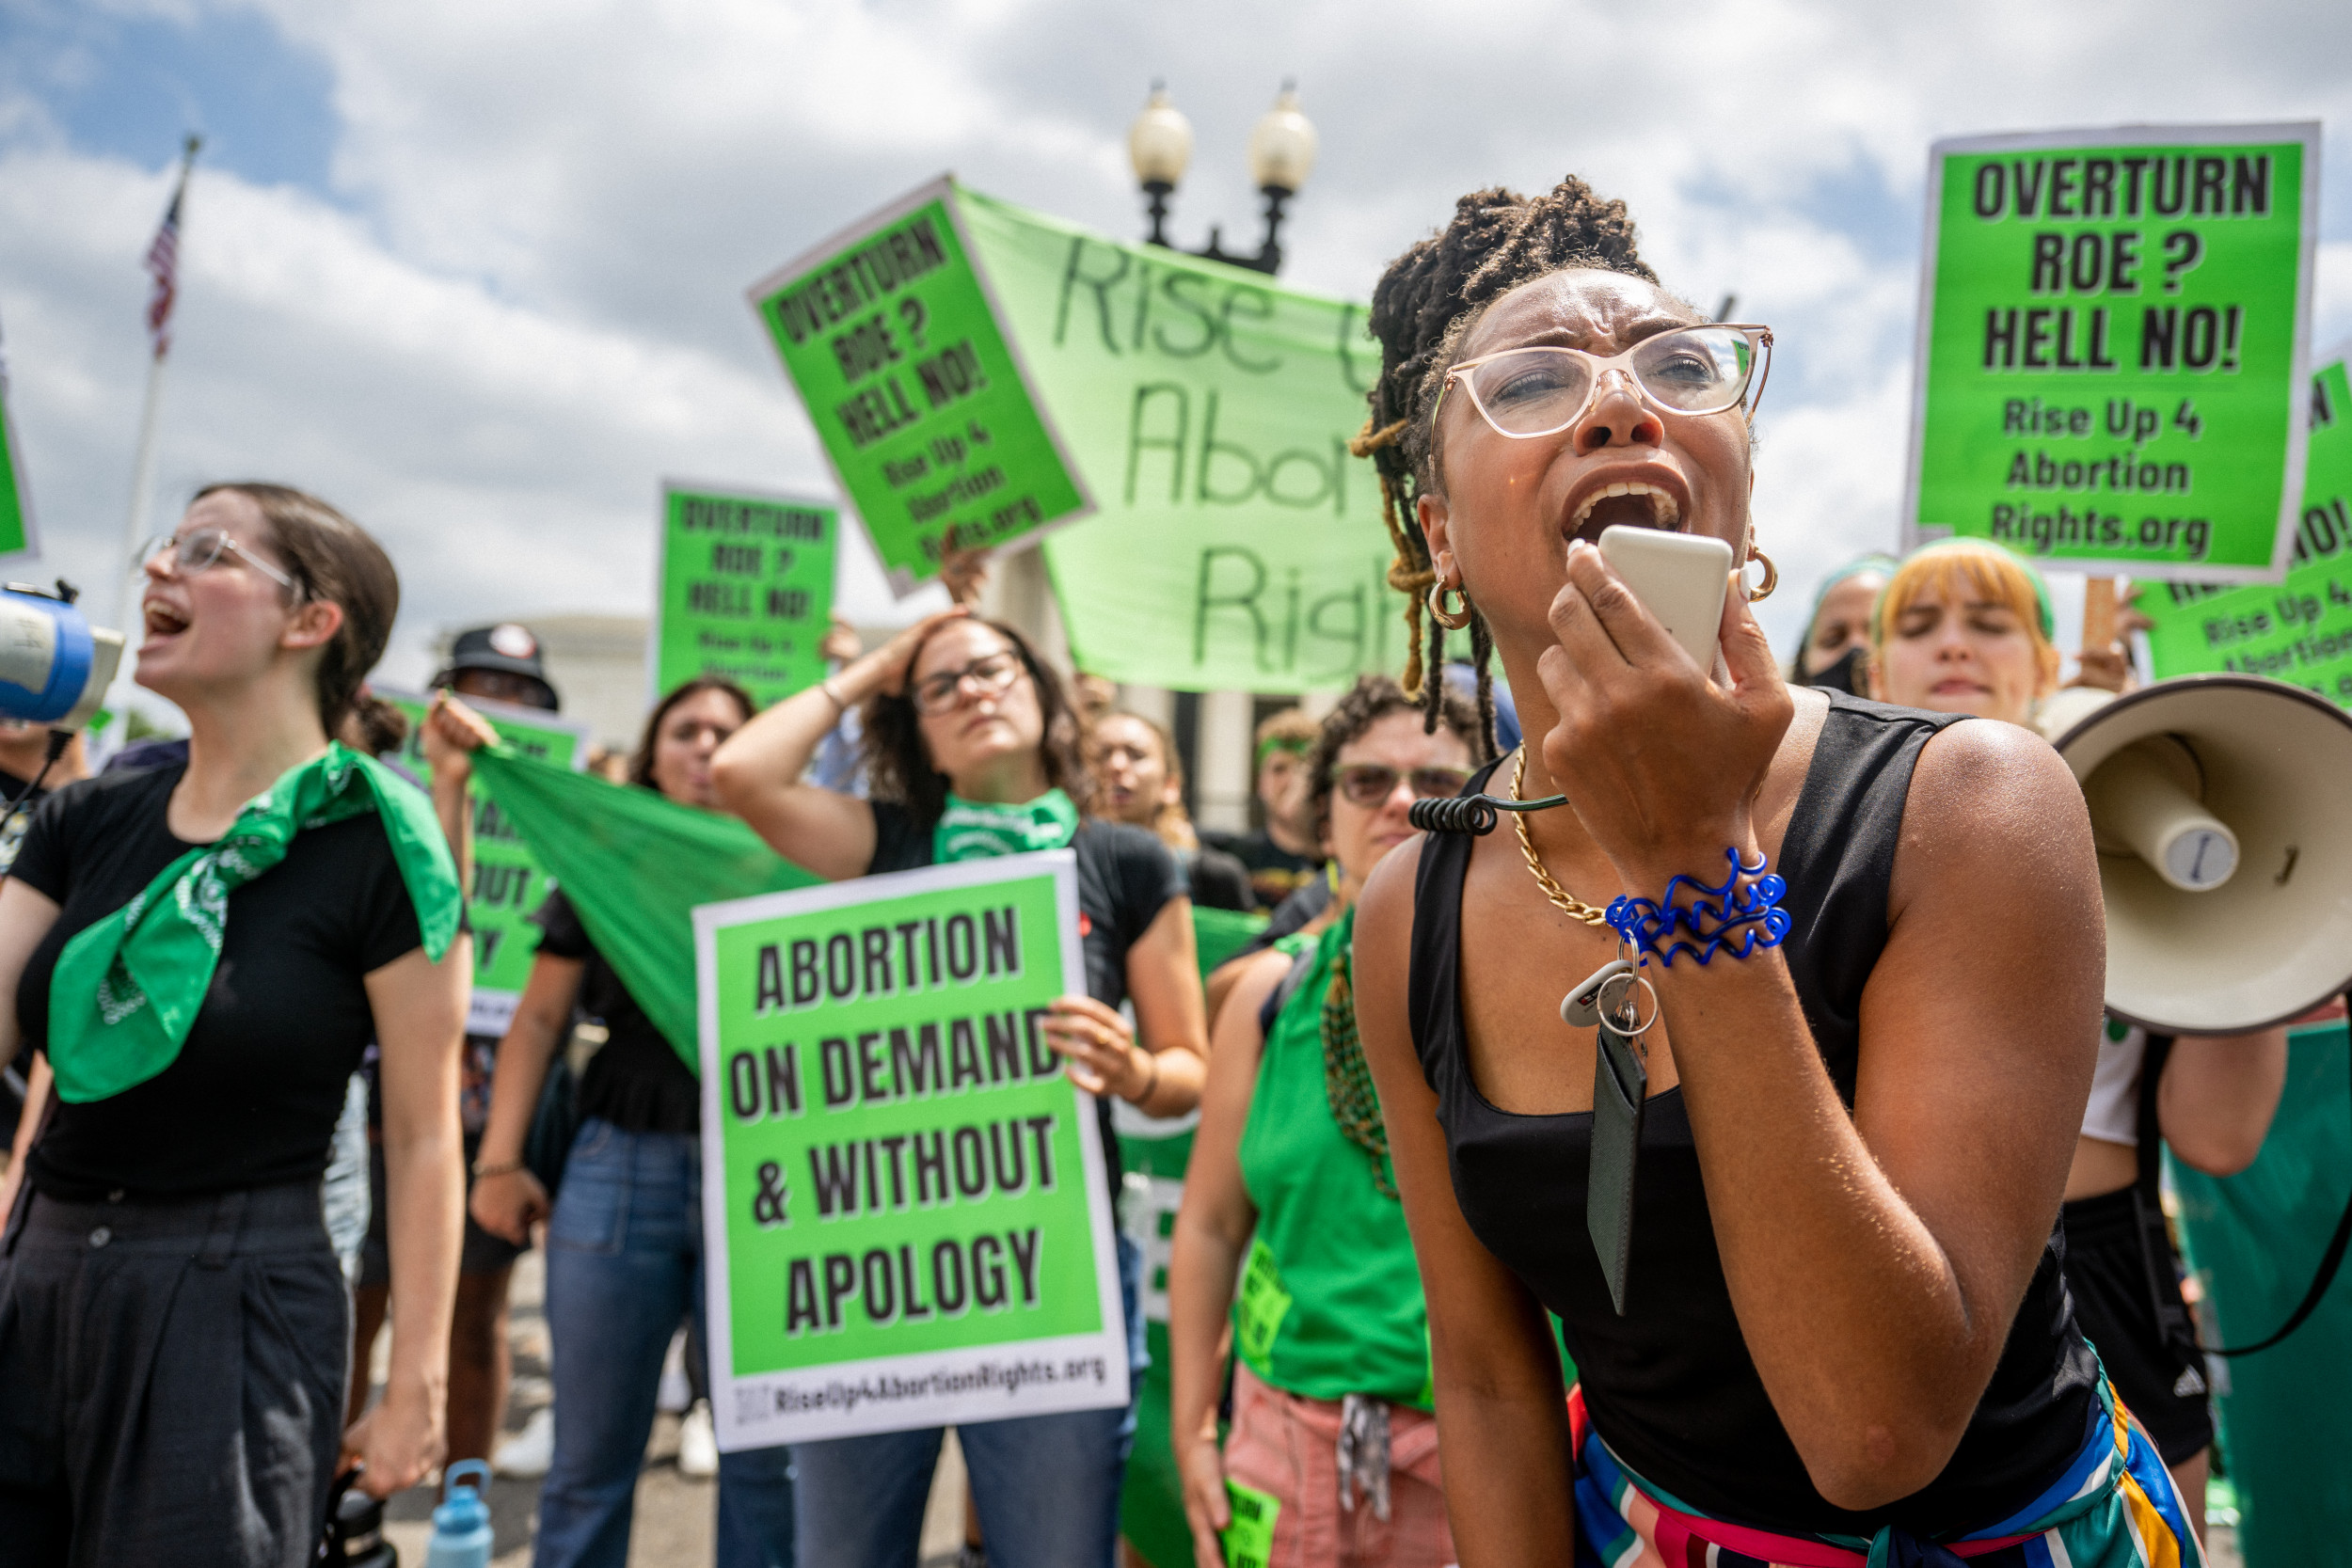 In Overturning Roe, the Supreme Court Has Endangered Black Women | Opinion